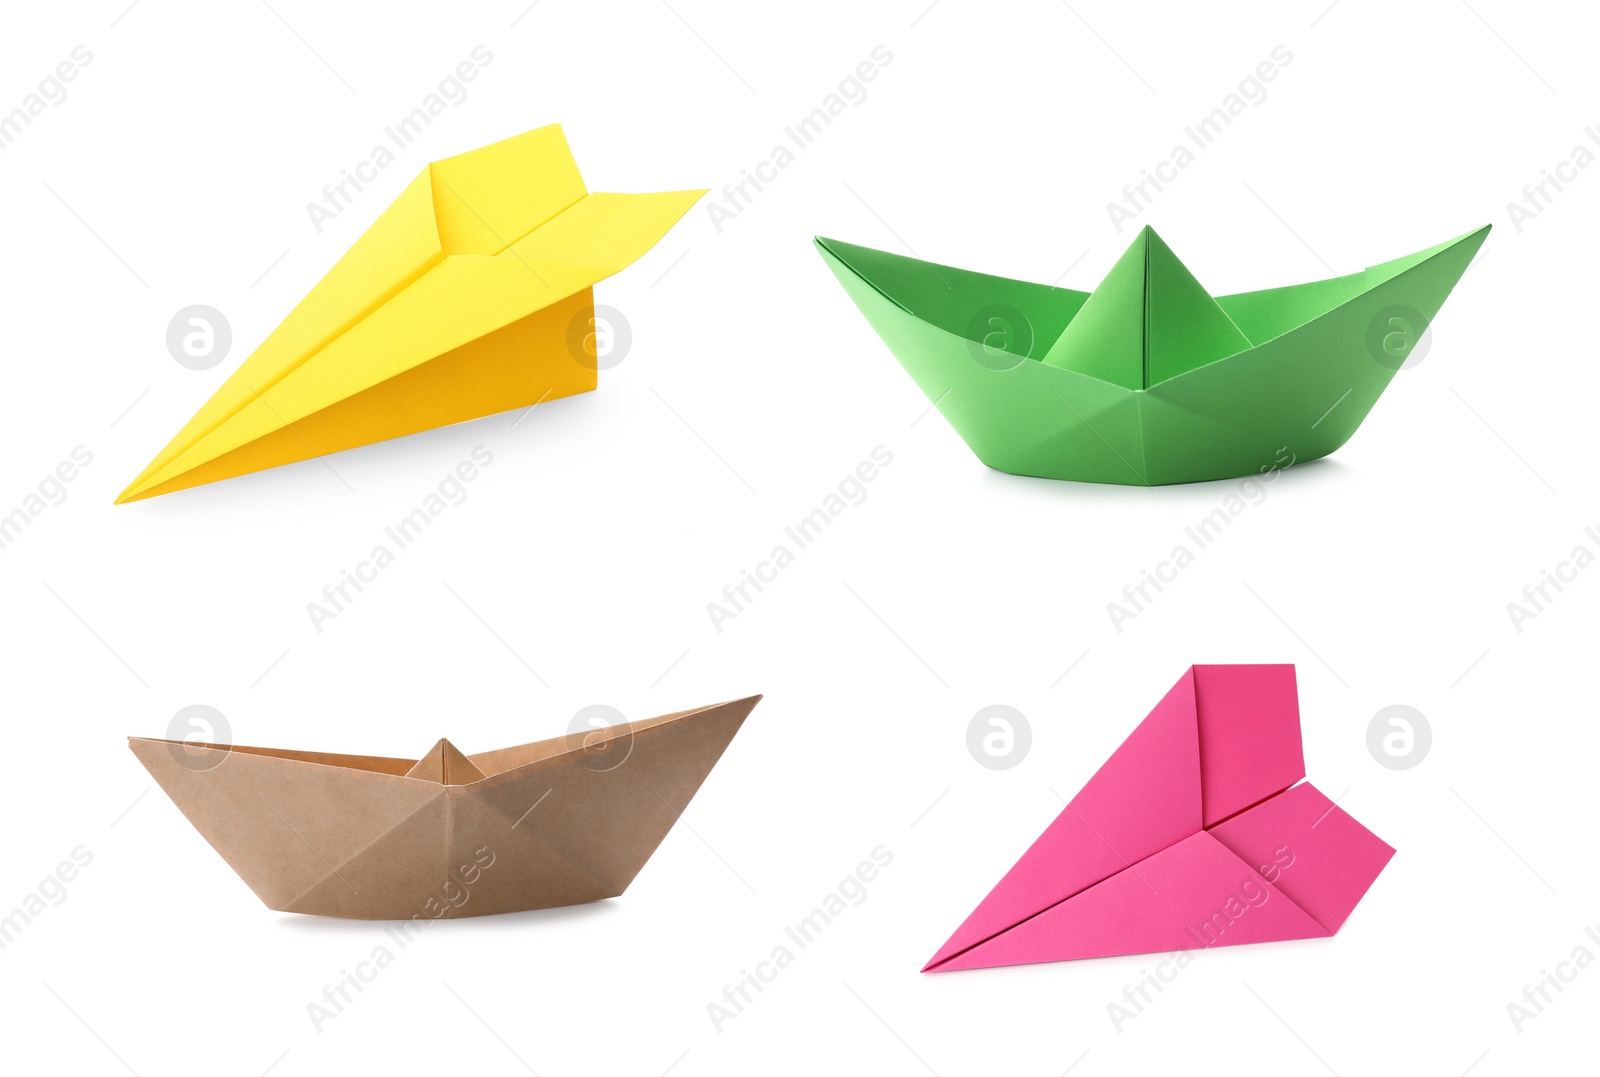 Image of Collage with many different paper planes and boats on white background. Origami art